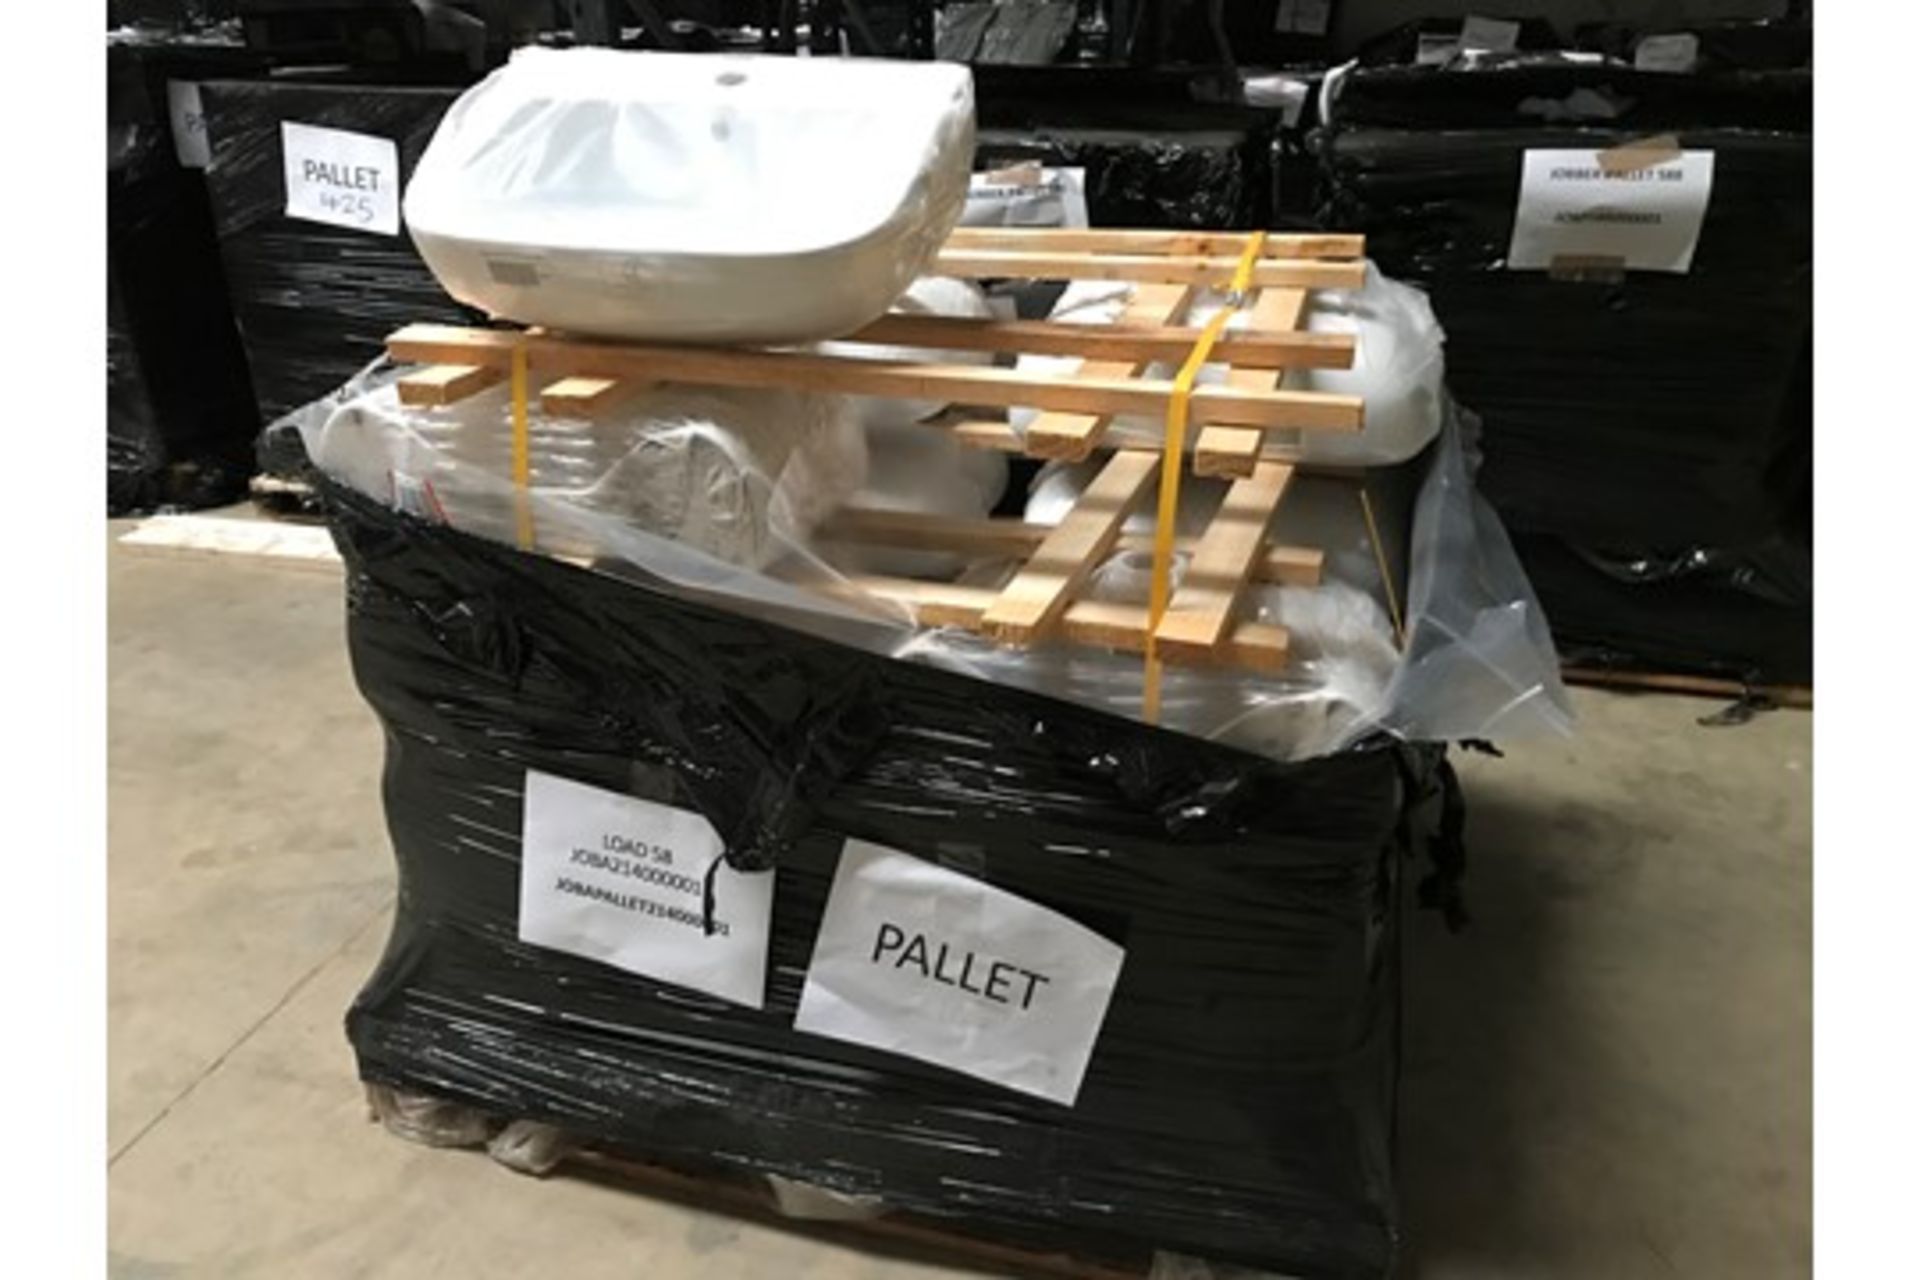 Pallet 232 - 16 x Phase Short Projection Basin - Image 3 of 3